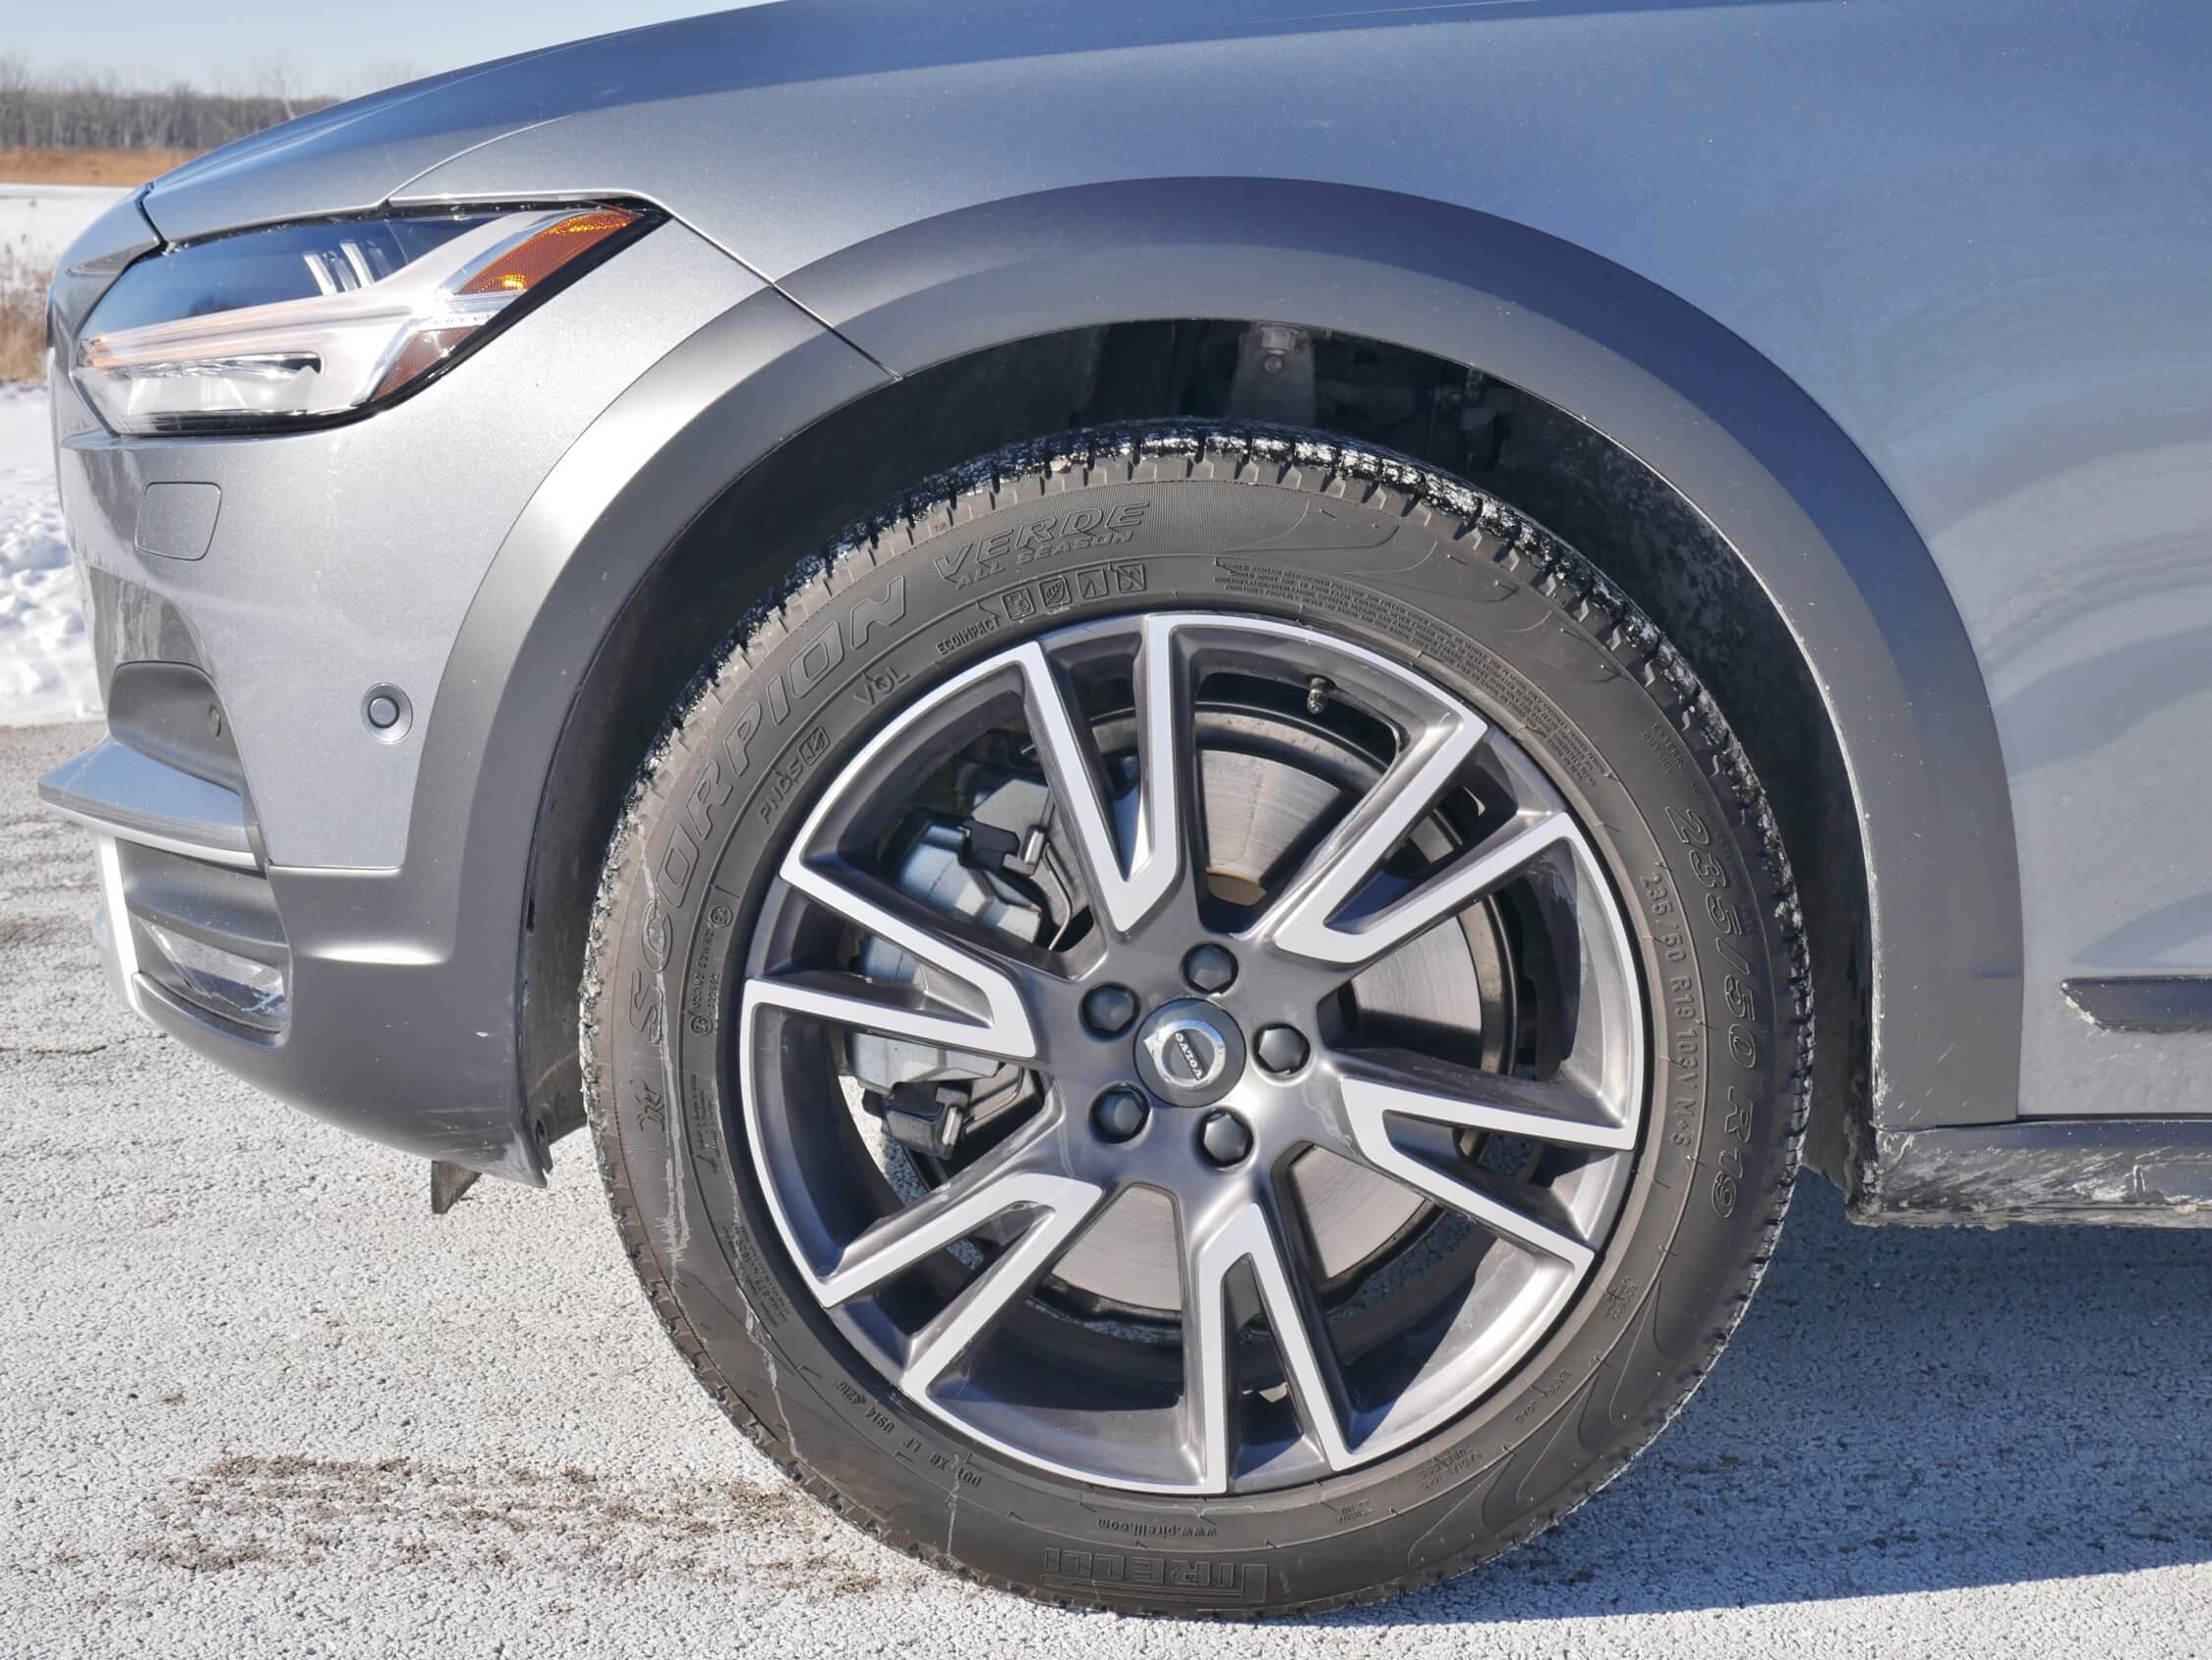 2018 Volvo V90 Cross Country T6: Pirelli 19" runflat M+S tires demand optional rear air-spring suspension to dampen impact quiver.